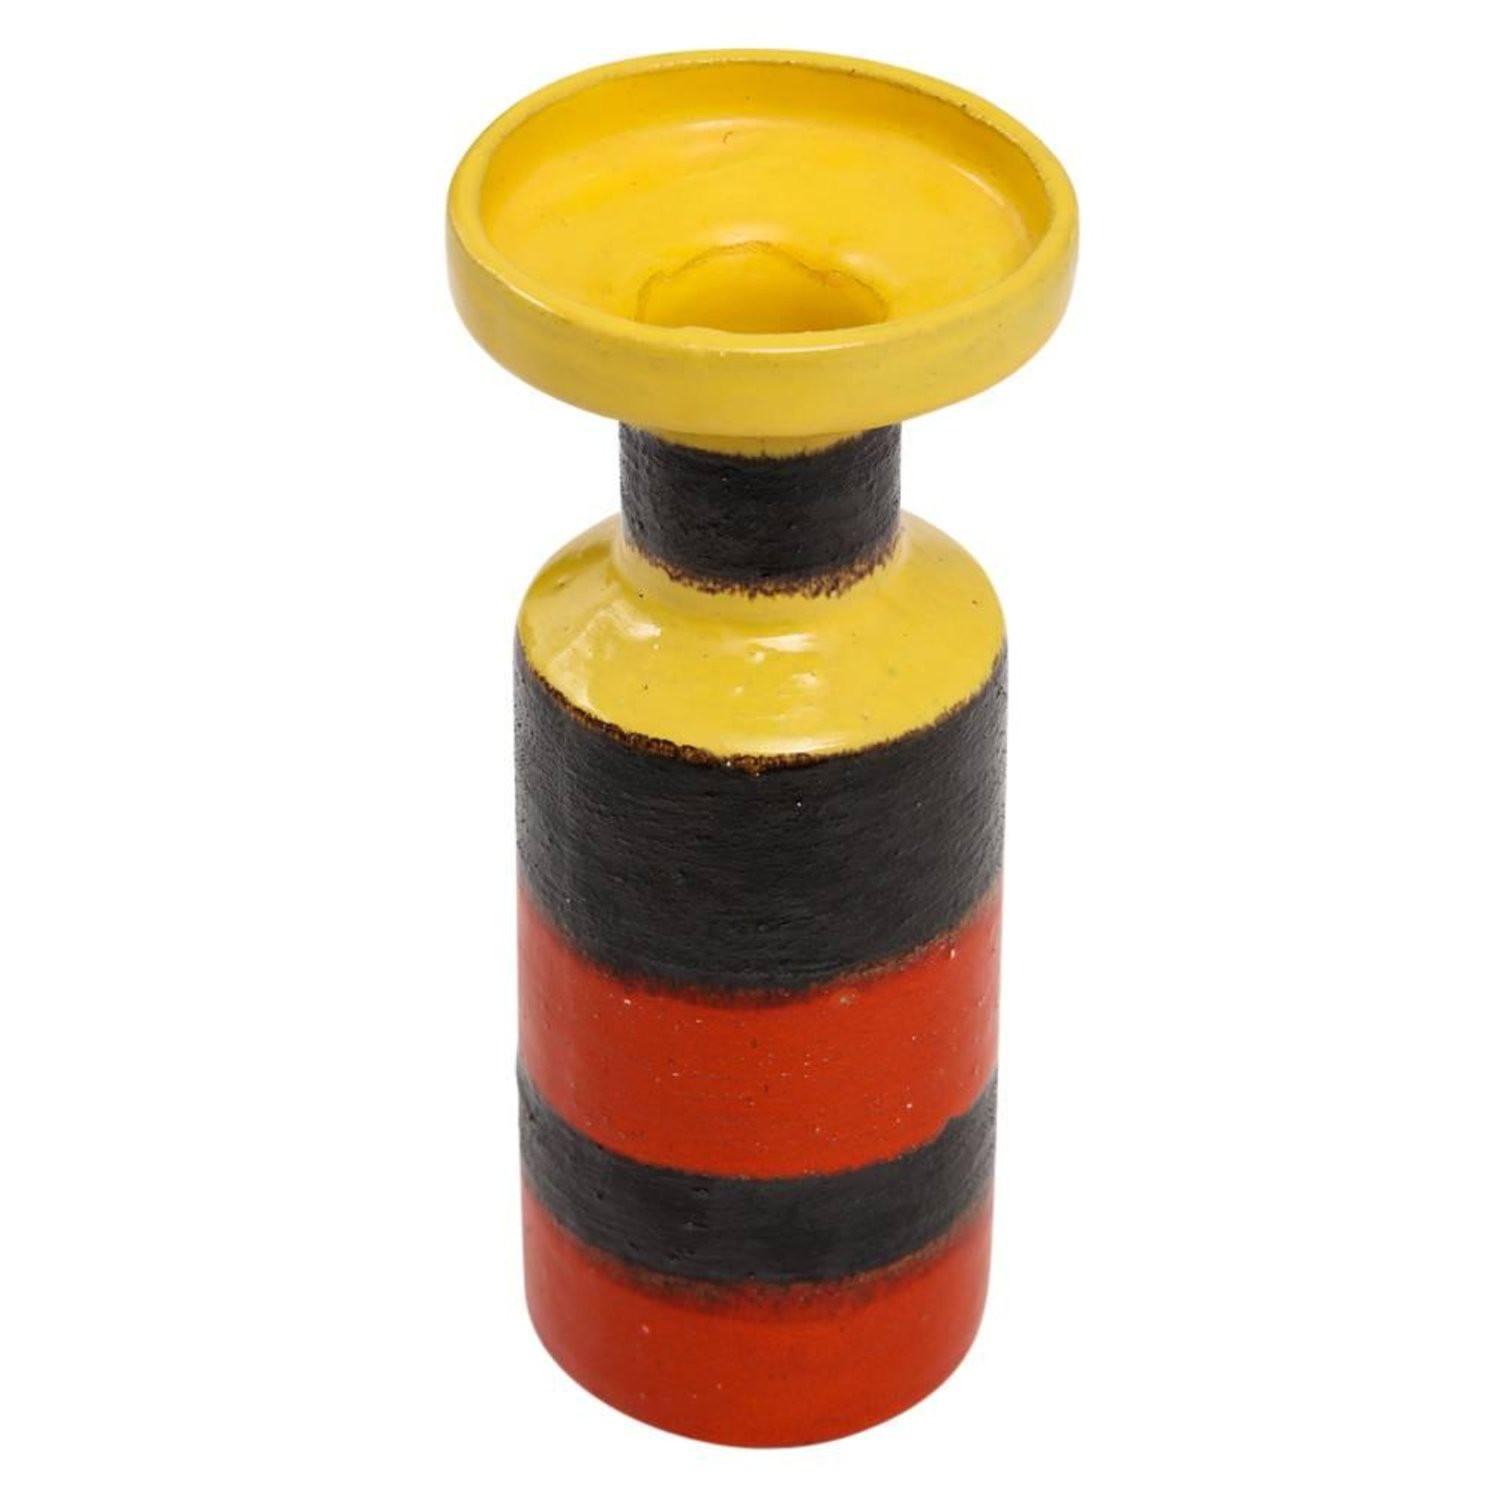 23 Nice Bottle Neck Glass Vase 2024 free download bottle neck glass vase of bitossi ceramic vase pottery stripes yellow red black signed italy for bitossi ceramic vase pottery stripes yellow red black signed italy 1960s for sale at 1stdibs